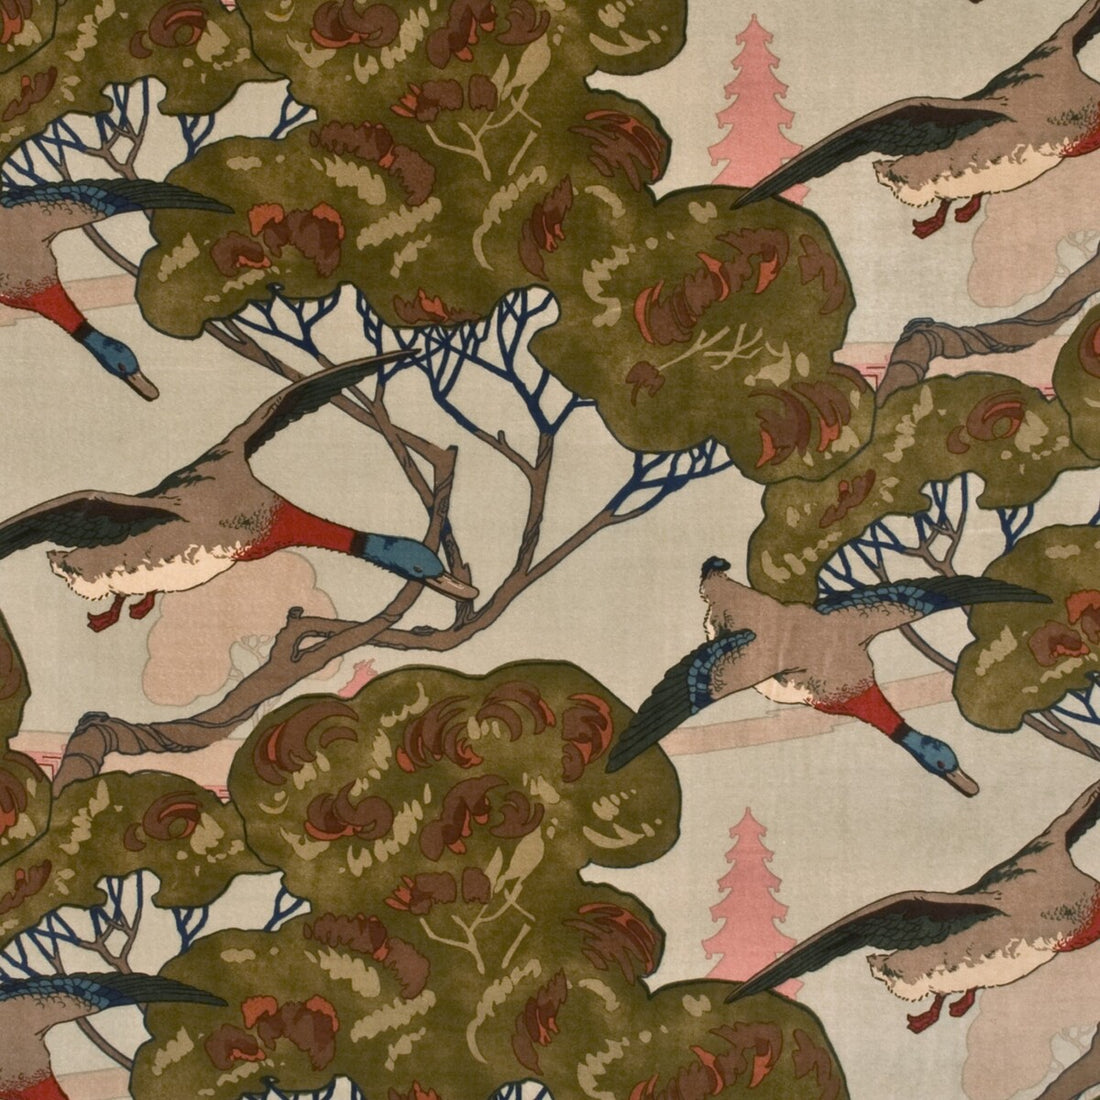 Flying Ducks Velvet fabric in sky color - pattern FD258.H22.0 - by Mulberry in the Country Weekend collection